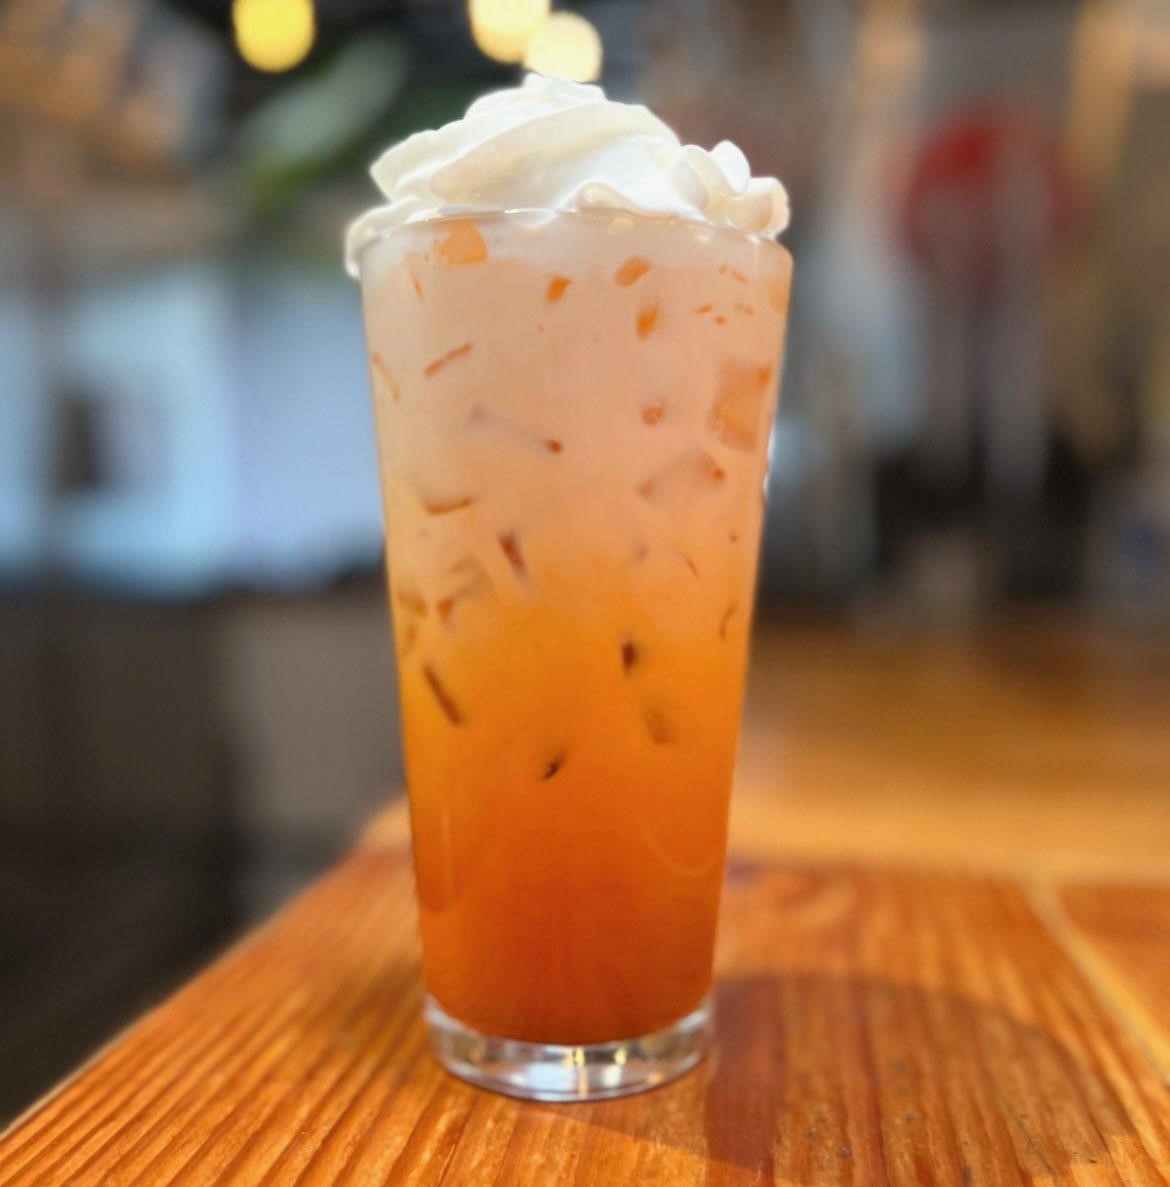 The Rustic Table Asian Kitchen | Thai Tea Iced Drink in Redding, California